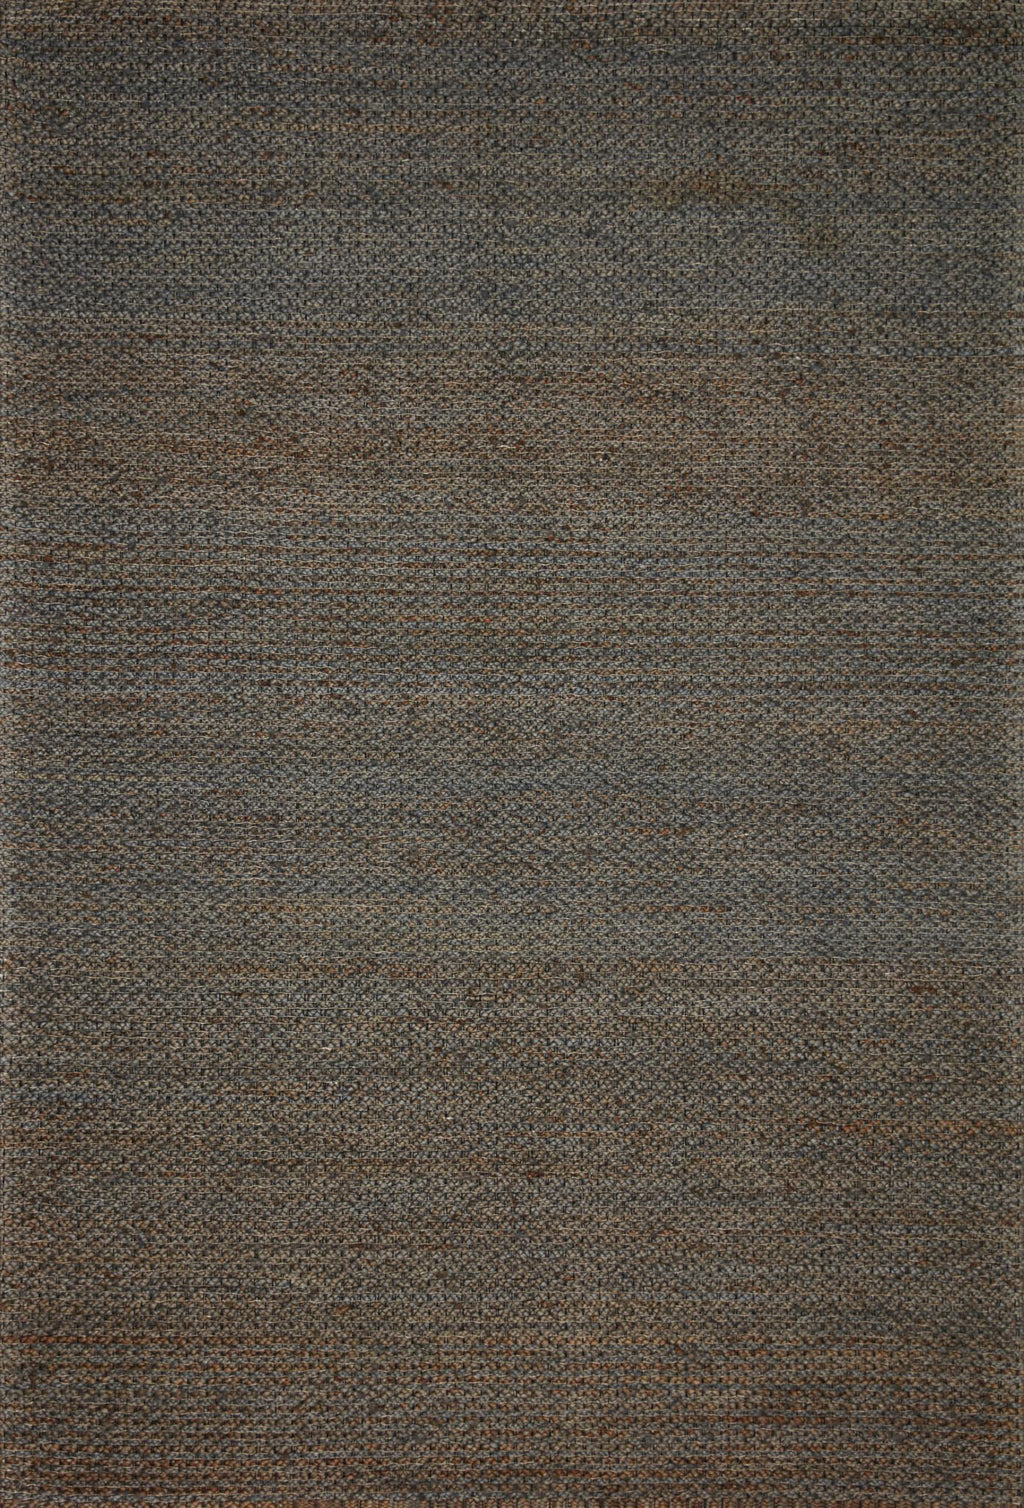 Loloi Lily LIL-01 Blue Area Rug